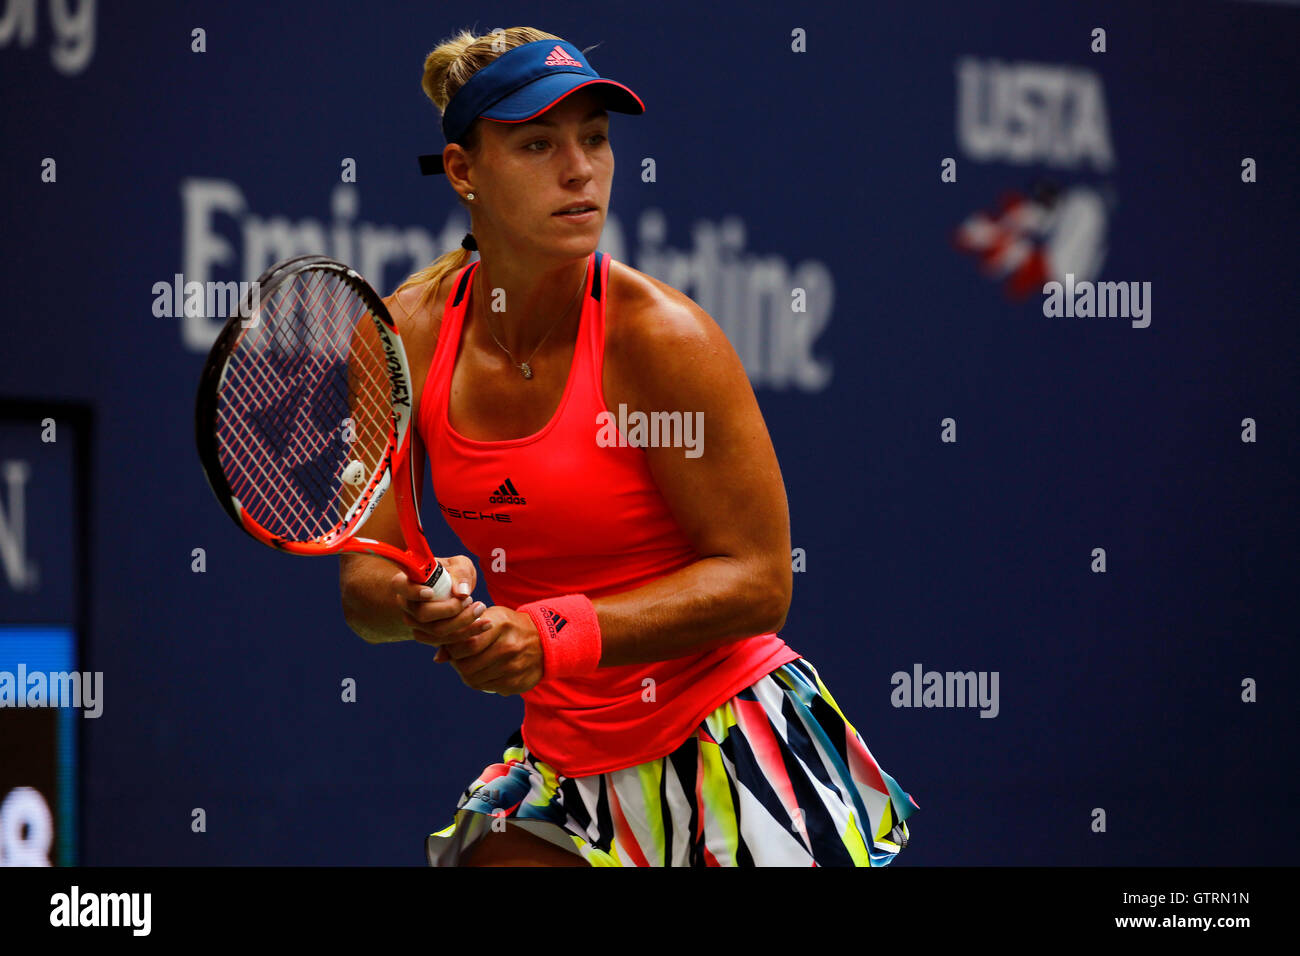 New York, USA. 10th September, 2016. Number 2 seed, Angelique Kerber of Germany in action against Karolina Pliskova of the Czech Republic during the finals of the United States Open Tennis Championships at Flushing Meadows, New York on Saturday, September 10th.  Kerber won the match and her first U.S. Open title in three sets Credit:  Adam Stoltman/Alamy Live News Stock Photo